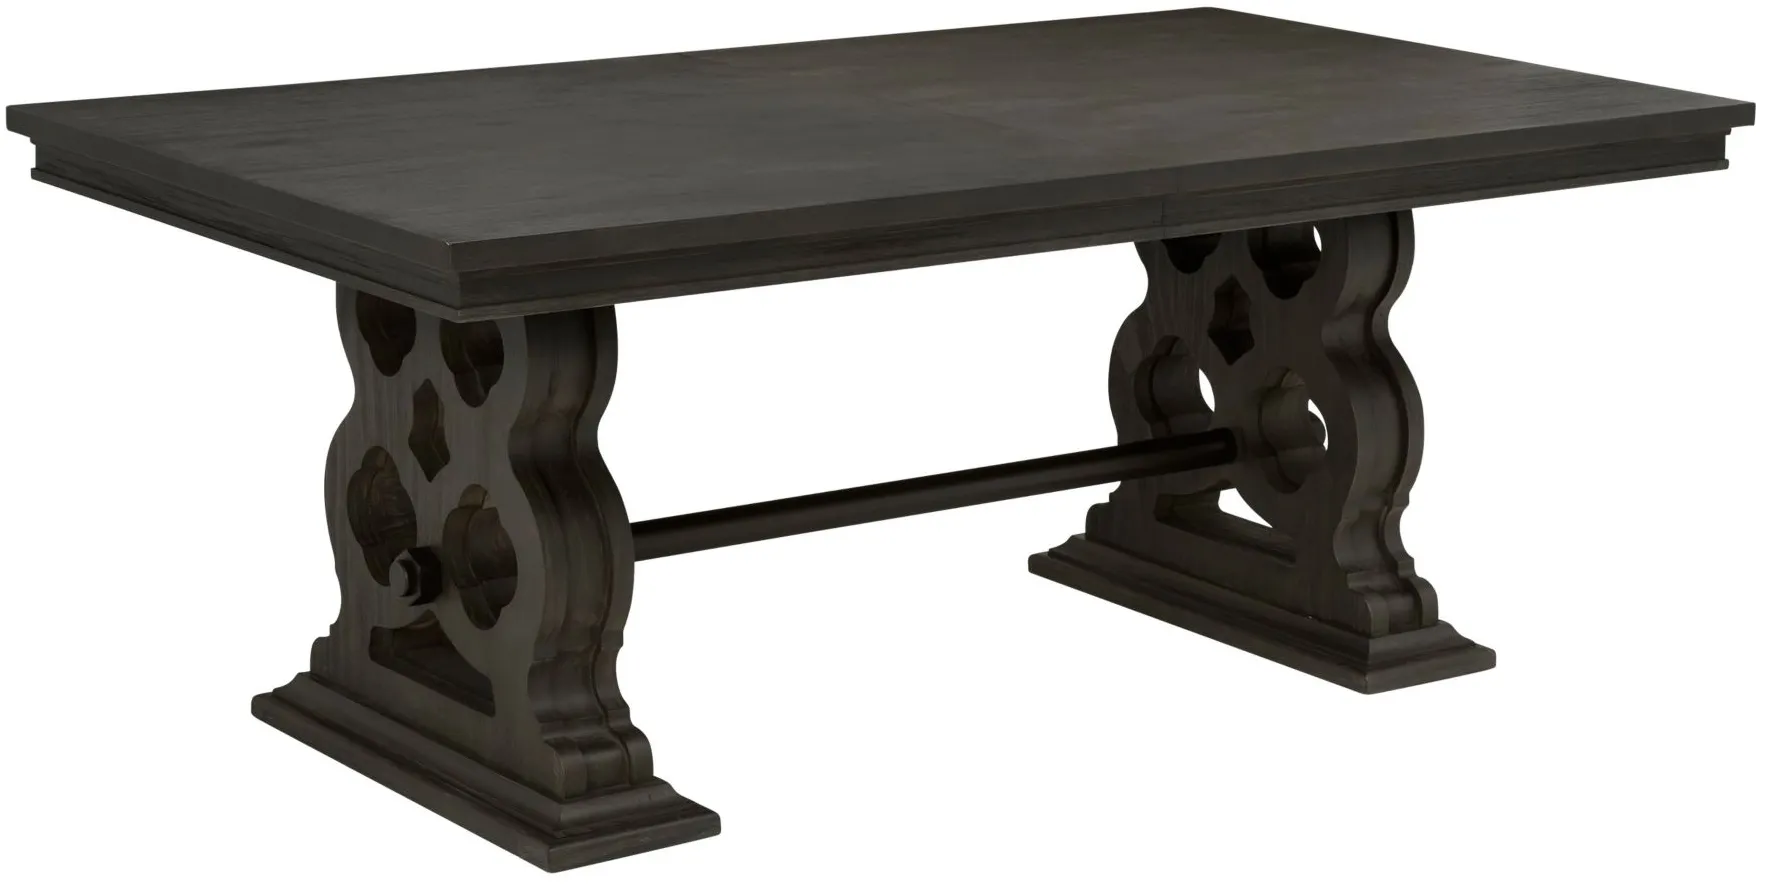 Belmore Dining Table W/Leaf in Gray / Espresso by Homelegance